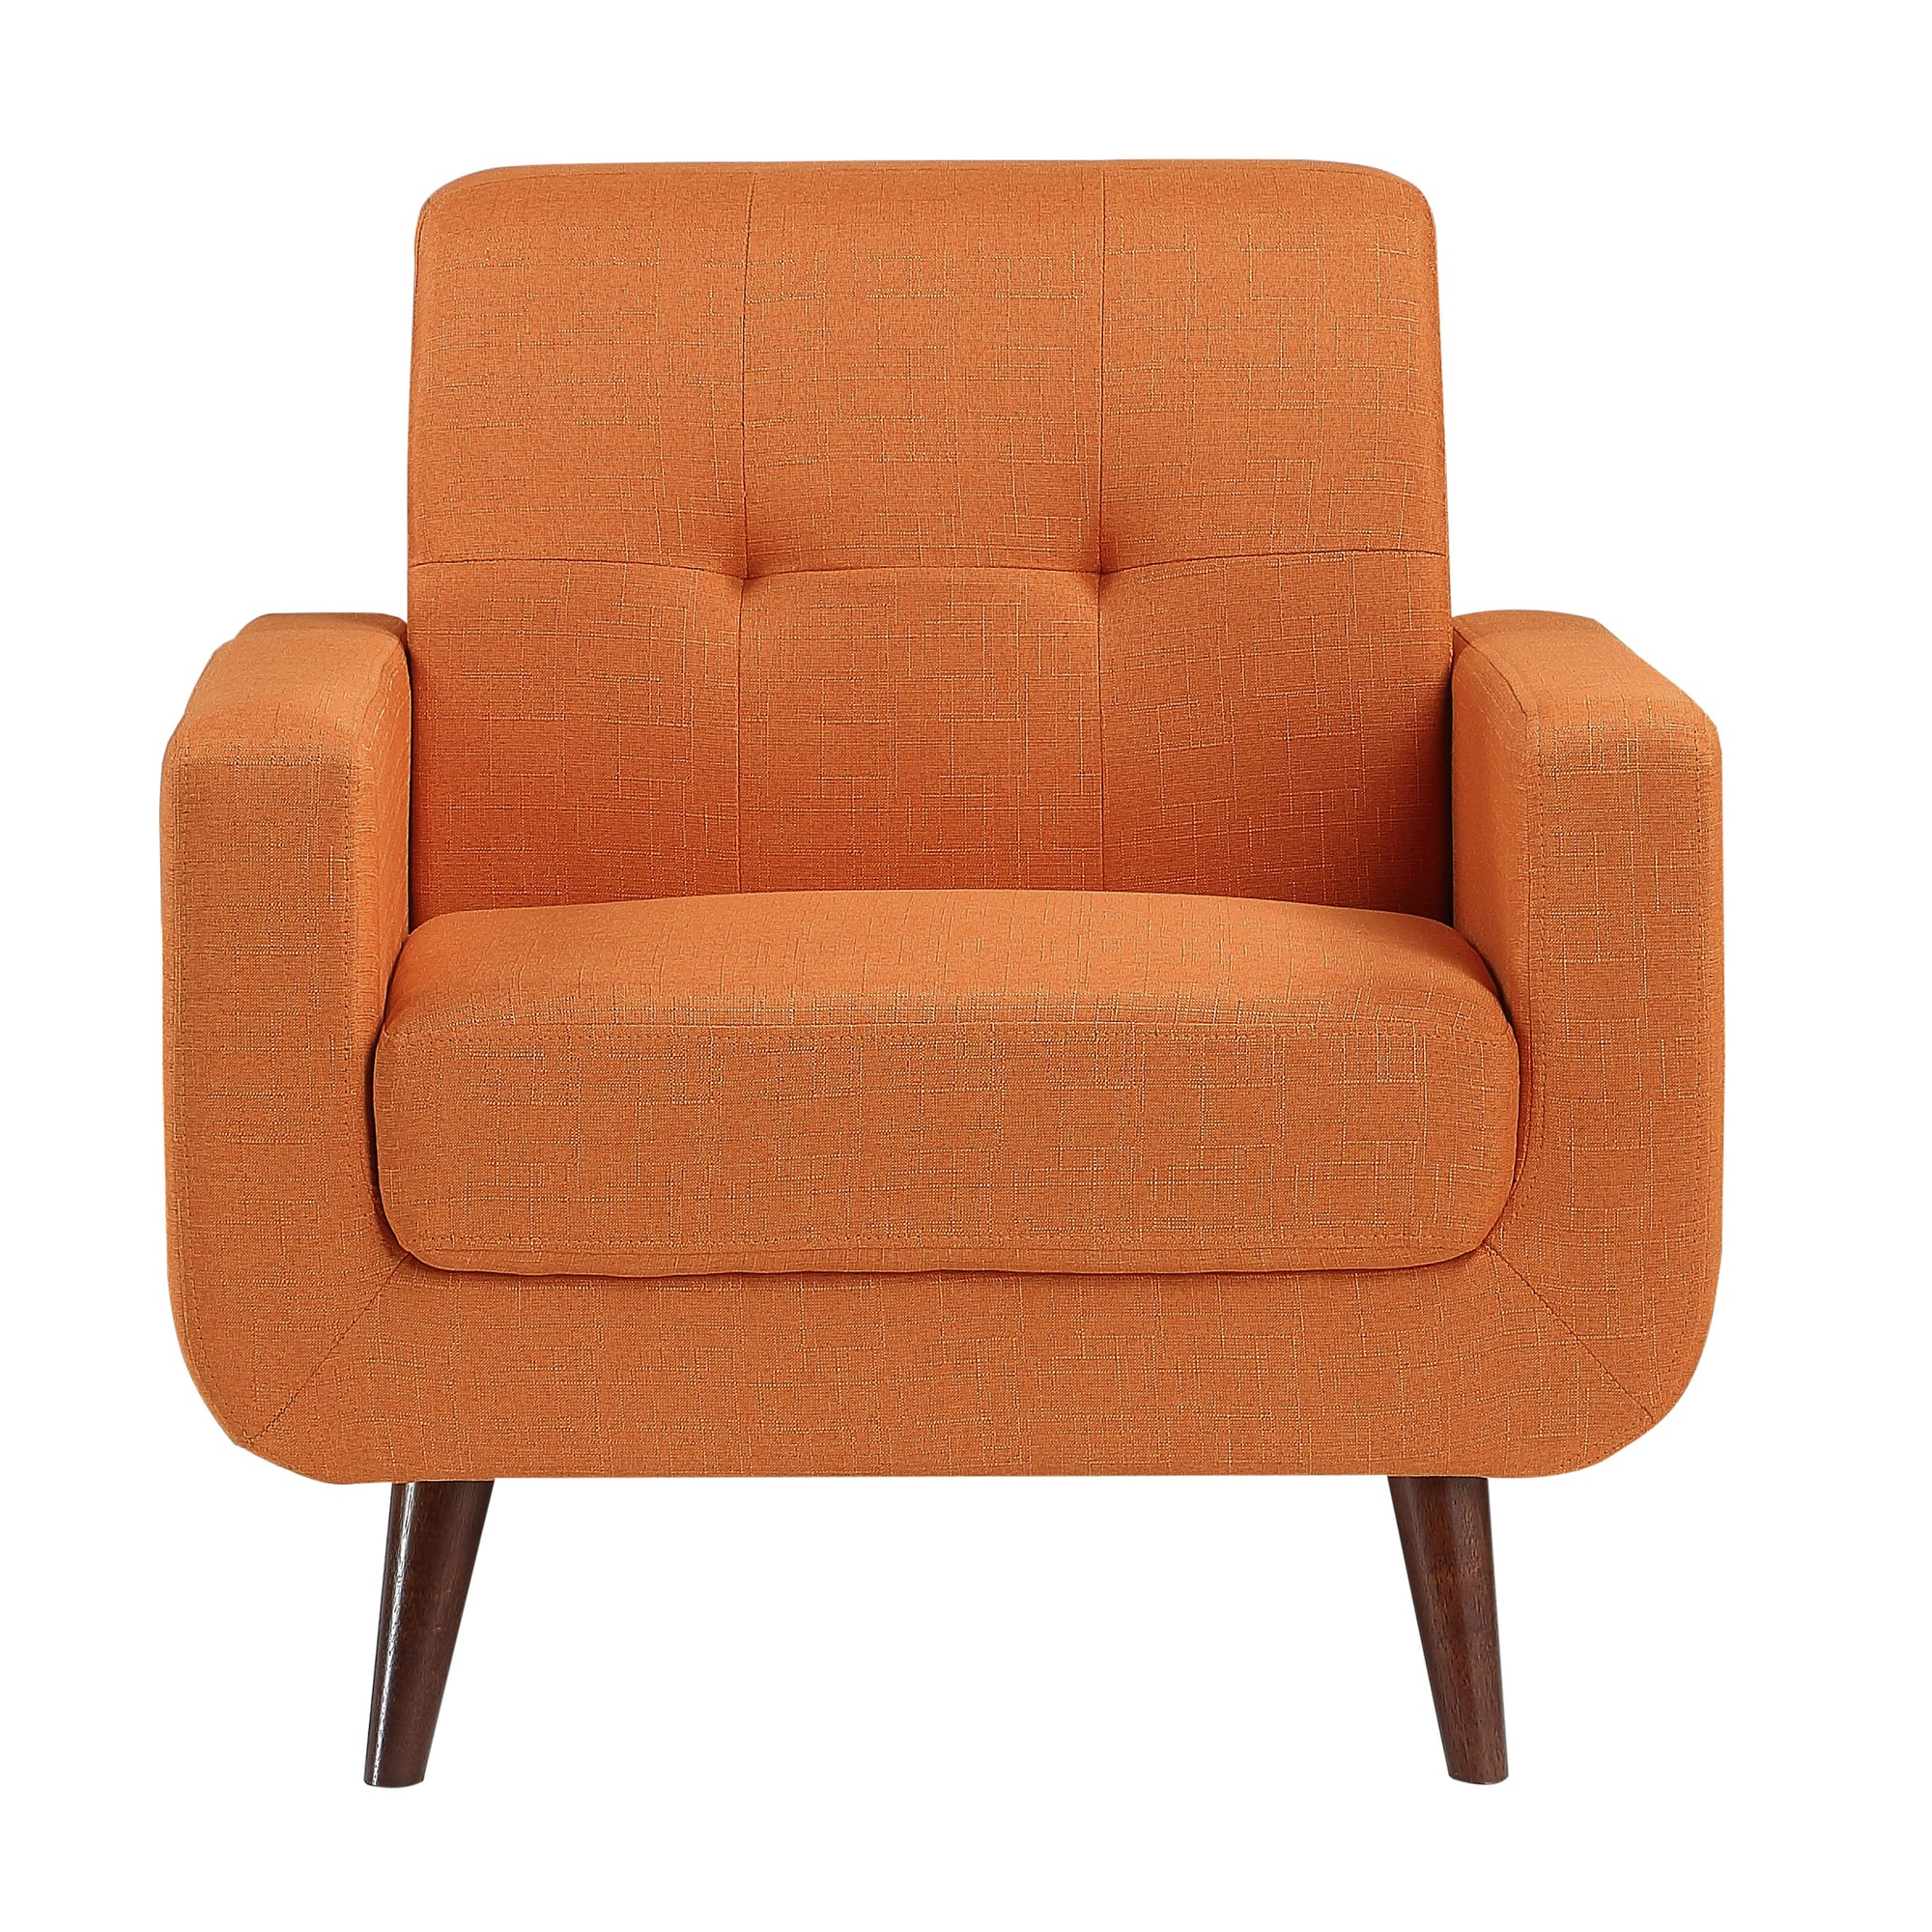 Orson Living Room Chair